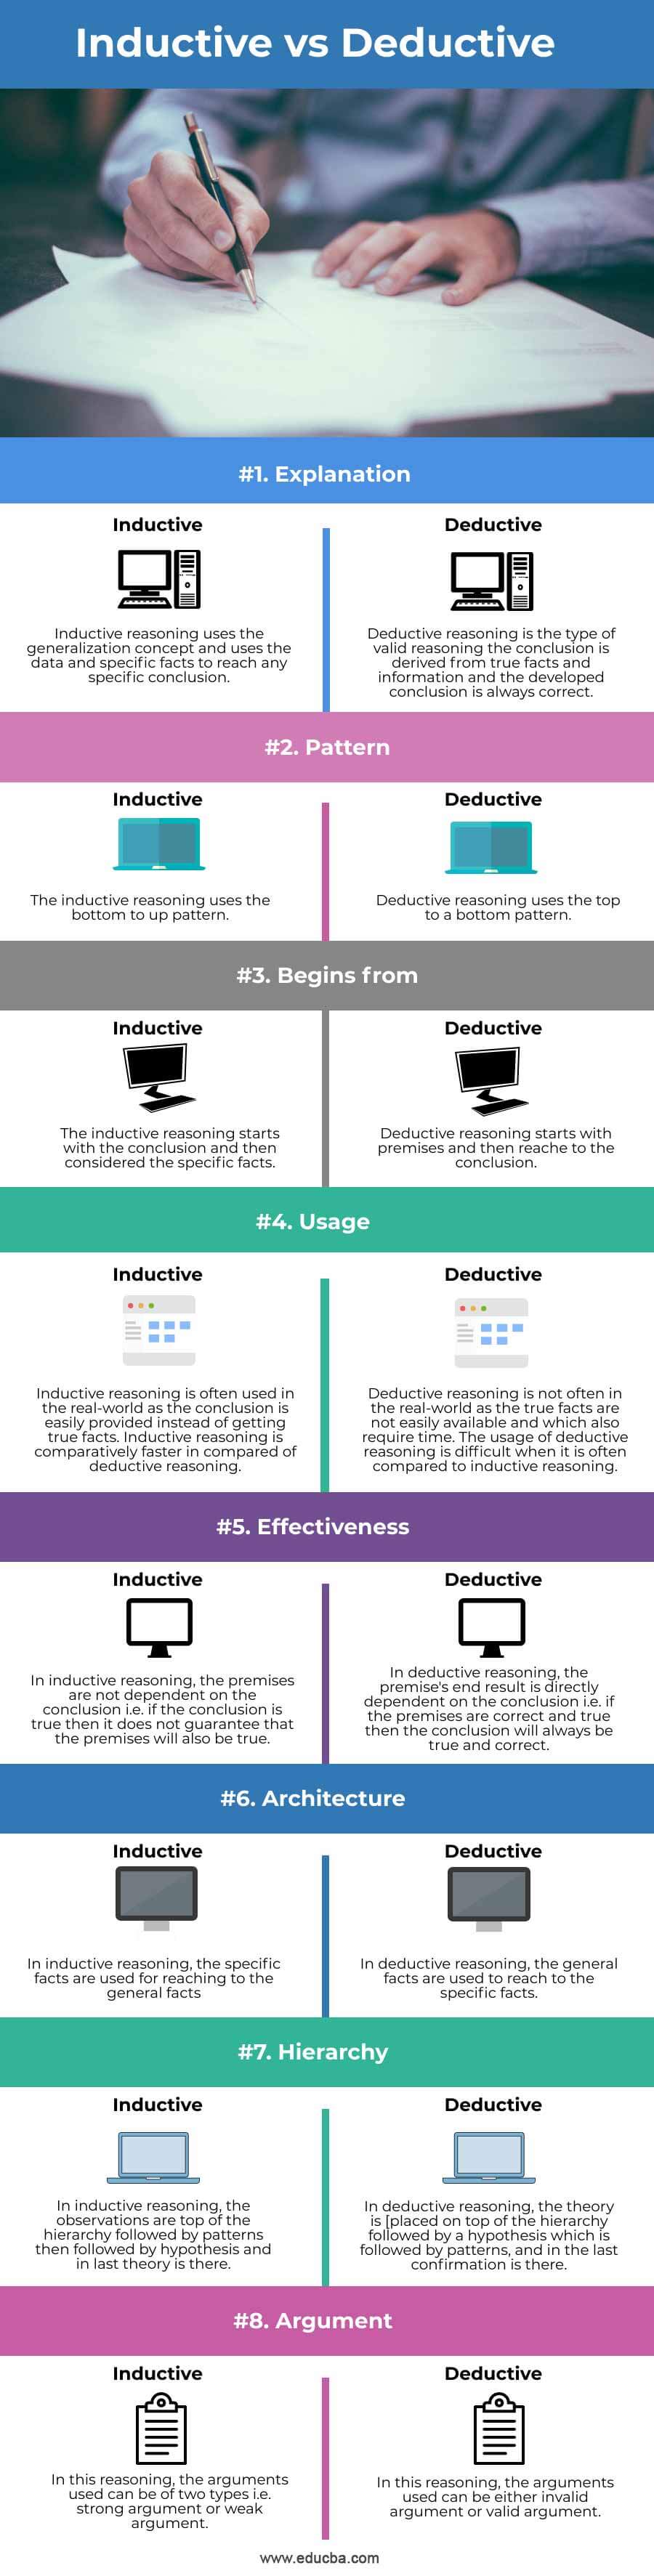 difference between inductive and deductive thinking